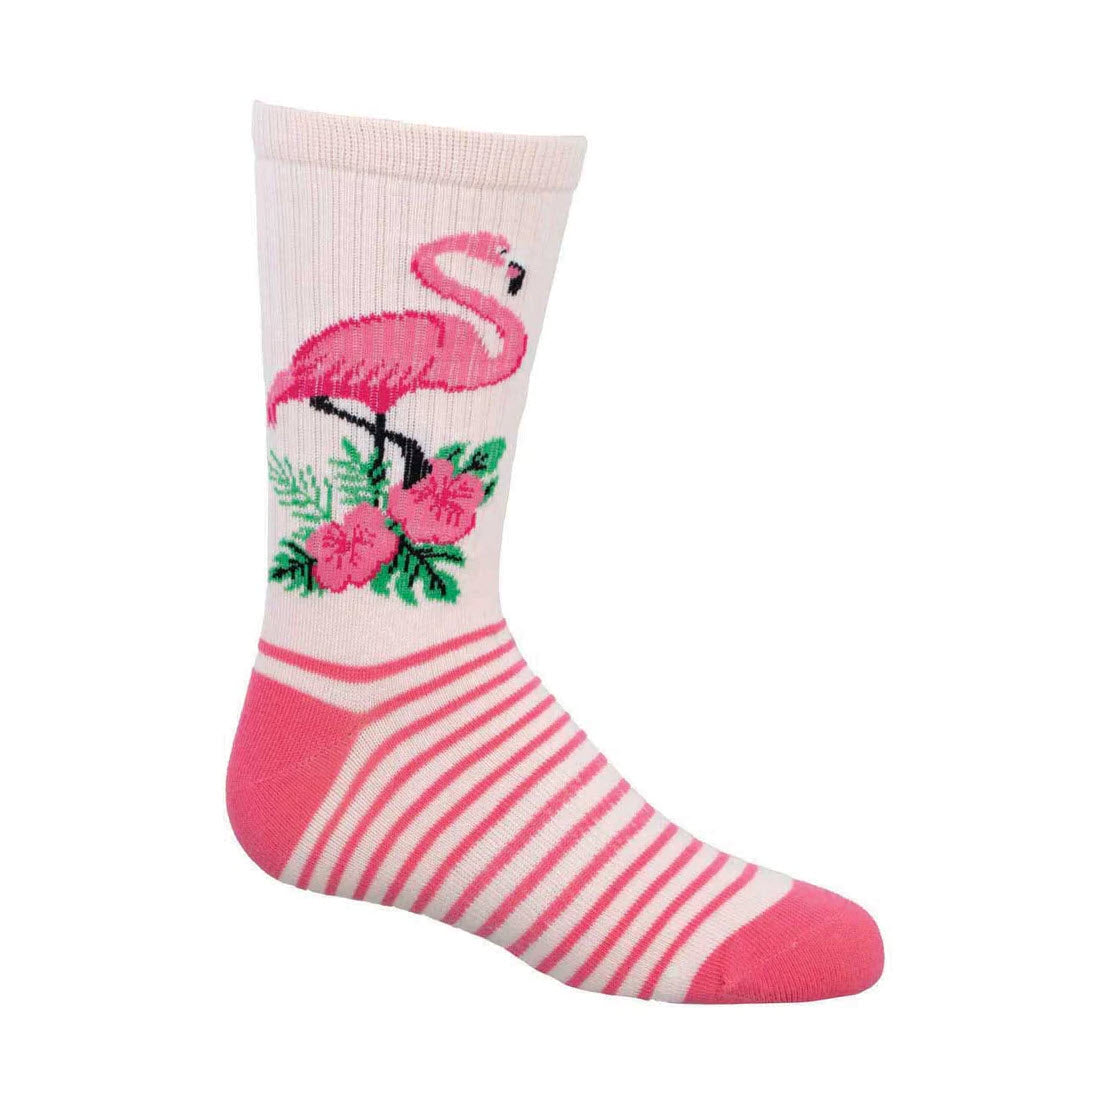 A **Socksmith Flamingo Floral Crew Socks Pink - Kids** featuring a cute pink flamingo and green floral embroidery on a plain background.